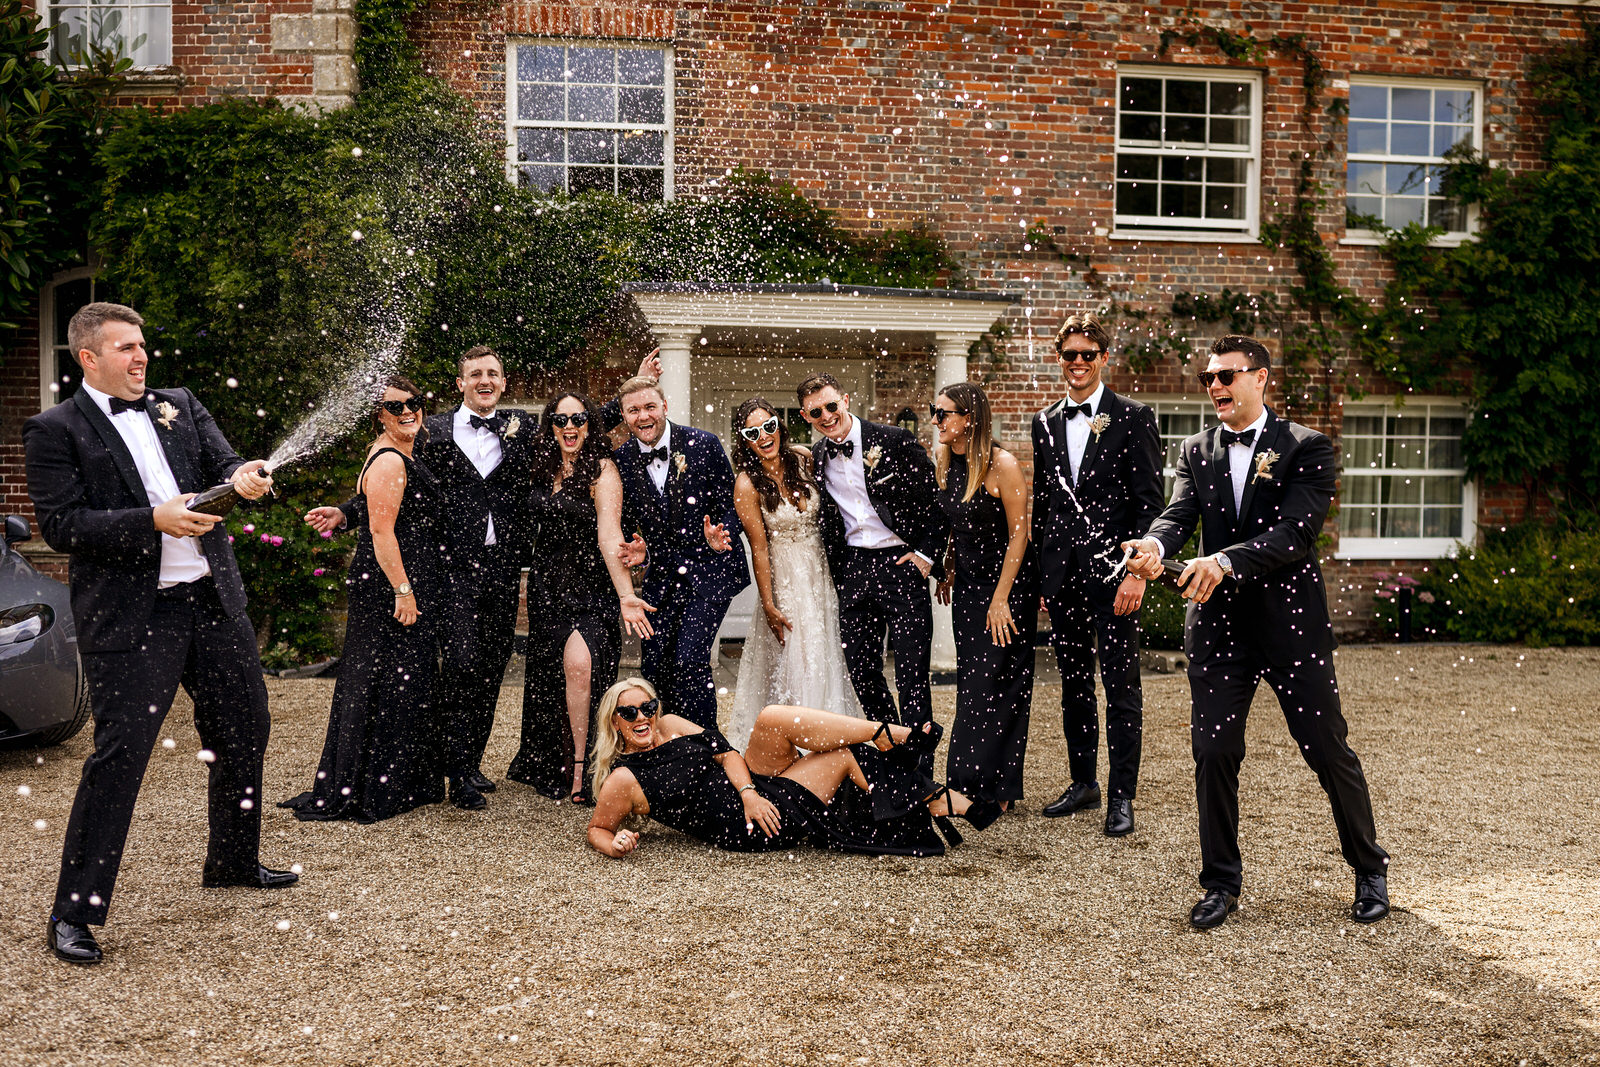 Champagne spray wedding at sunset with bridal party hot wedding trends